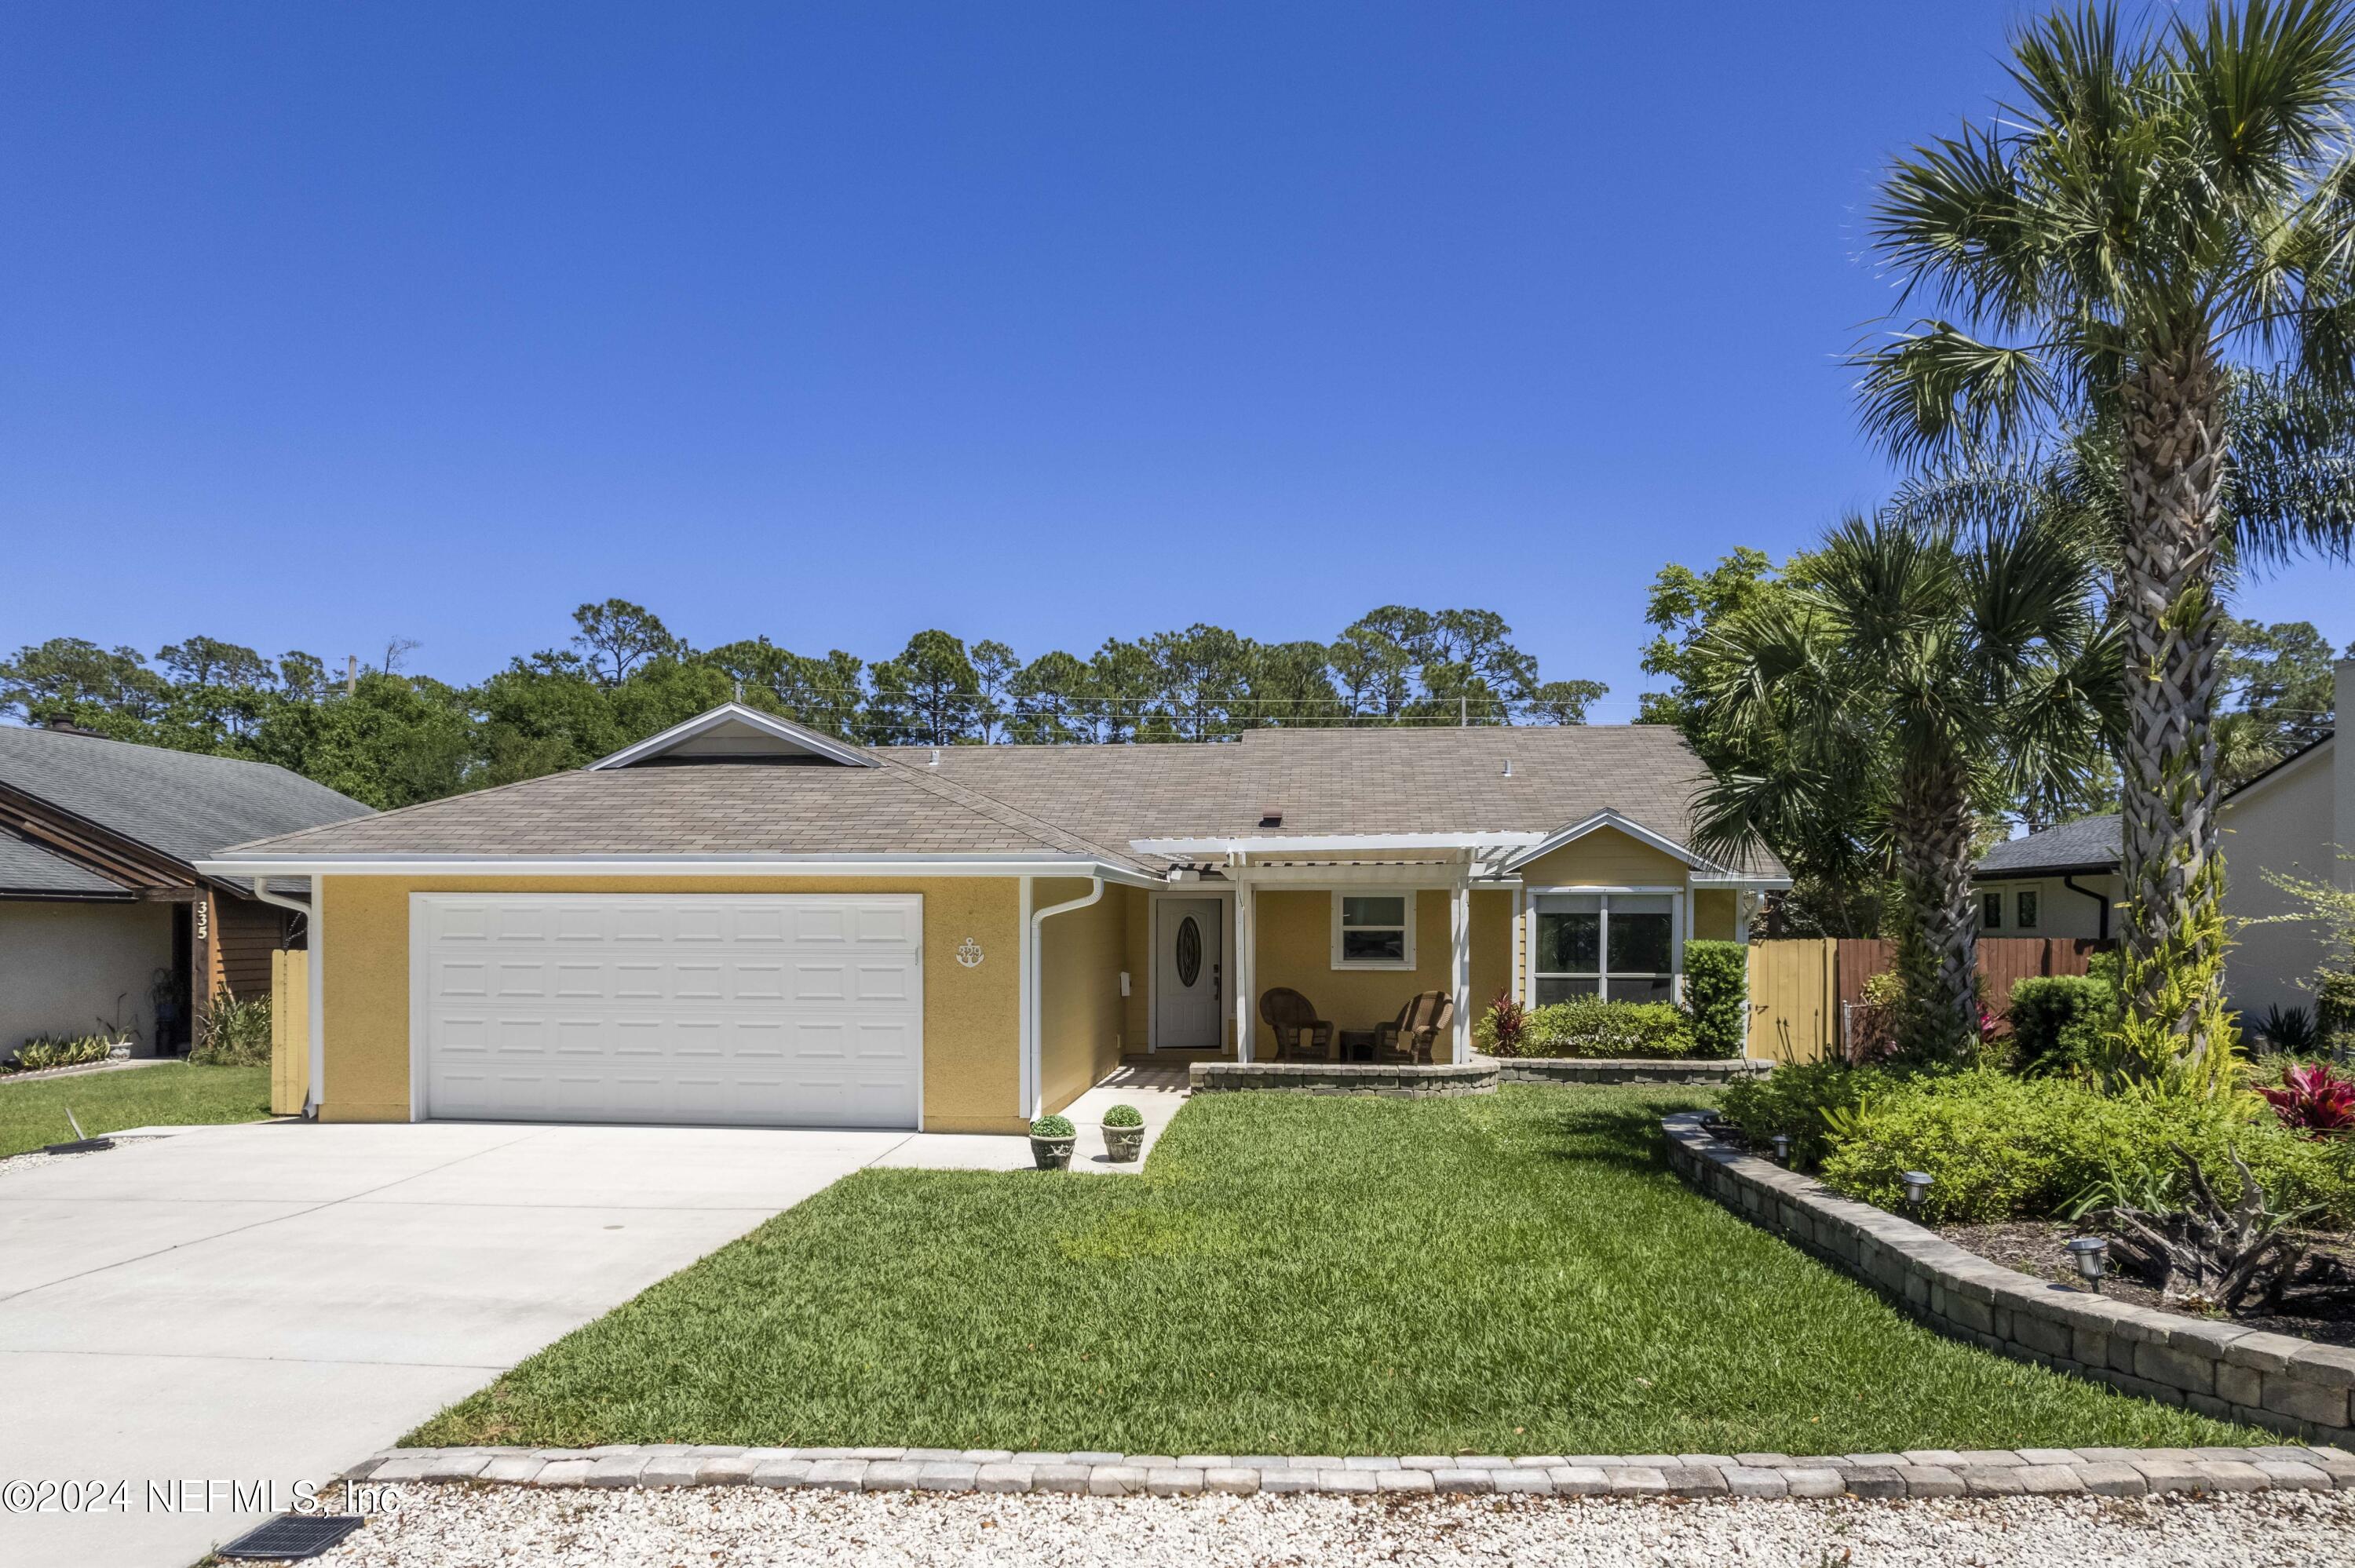 Jacksonville Beach, FL home for sale located at 329 15th Street N, Jacksonville Beach, FL 32250